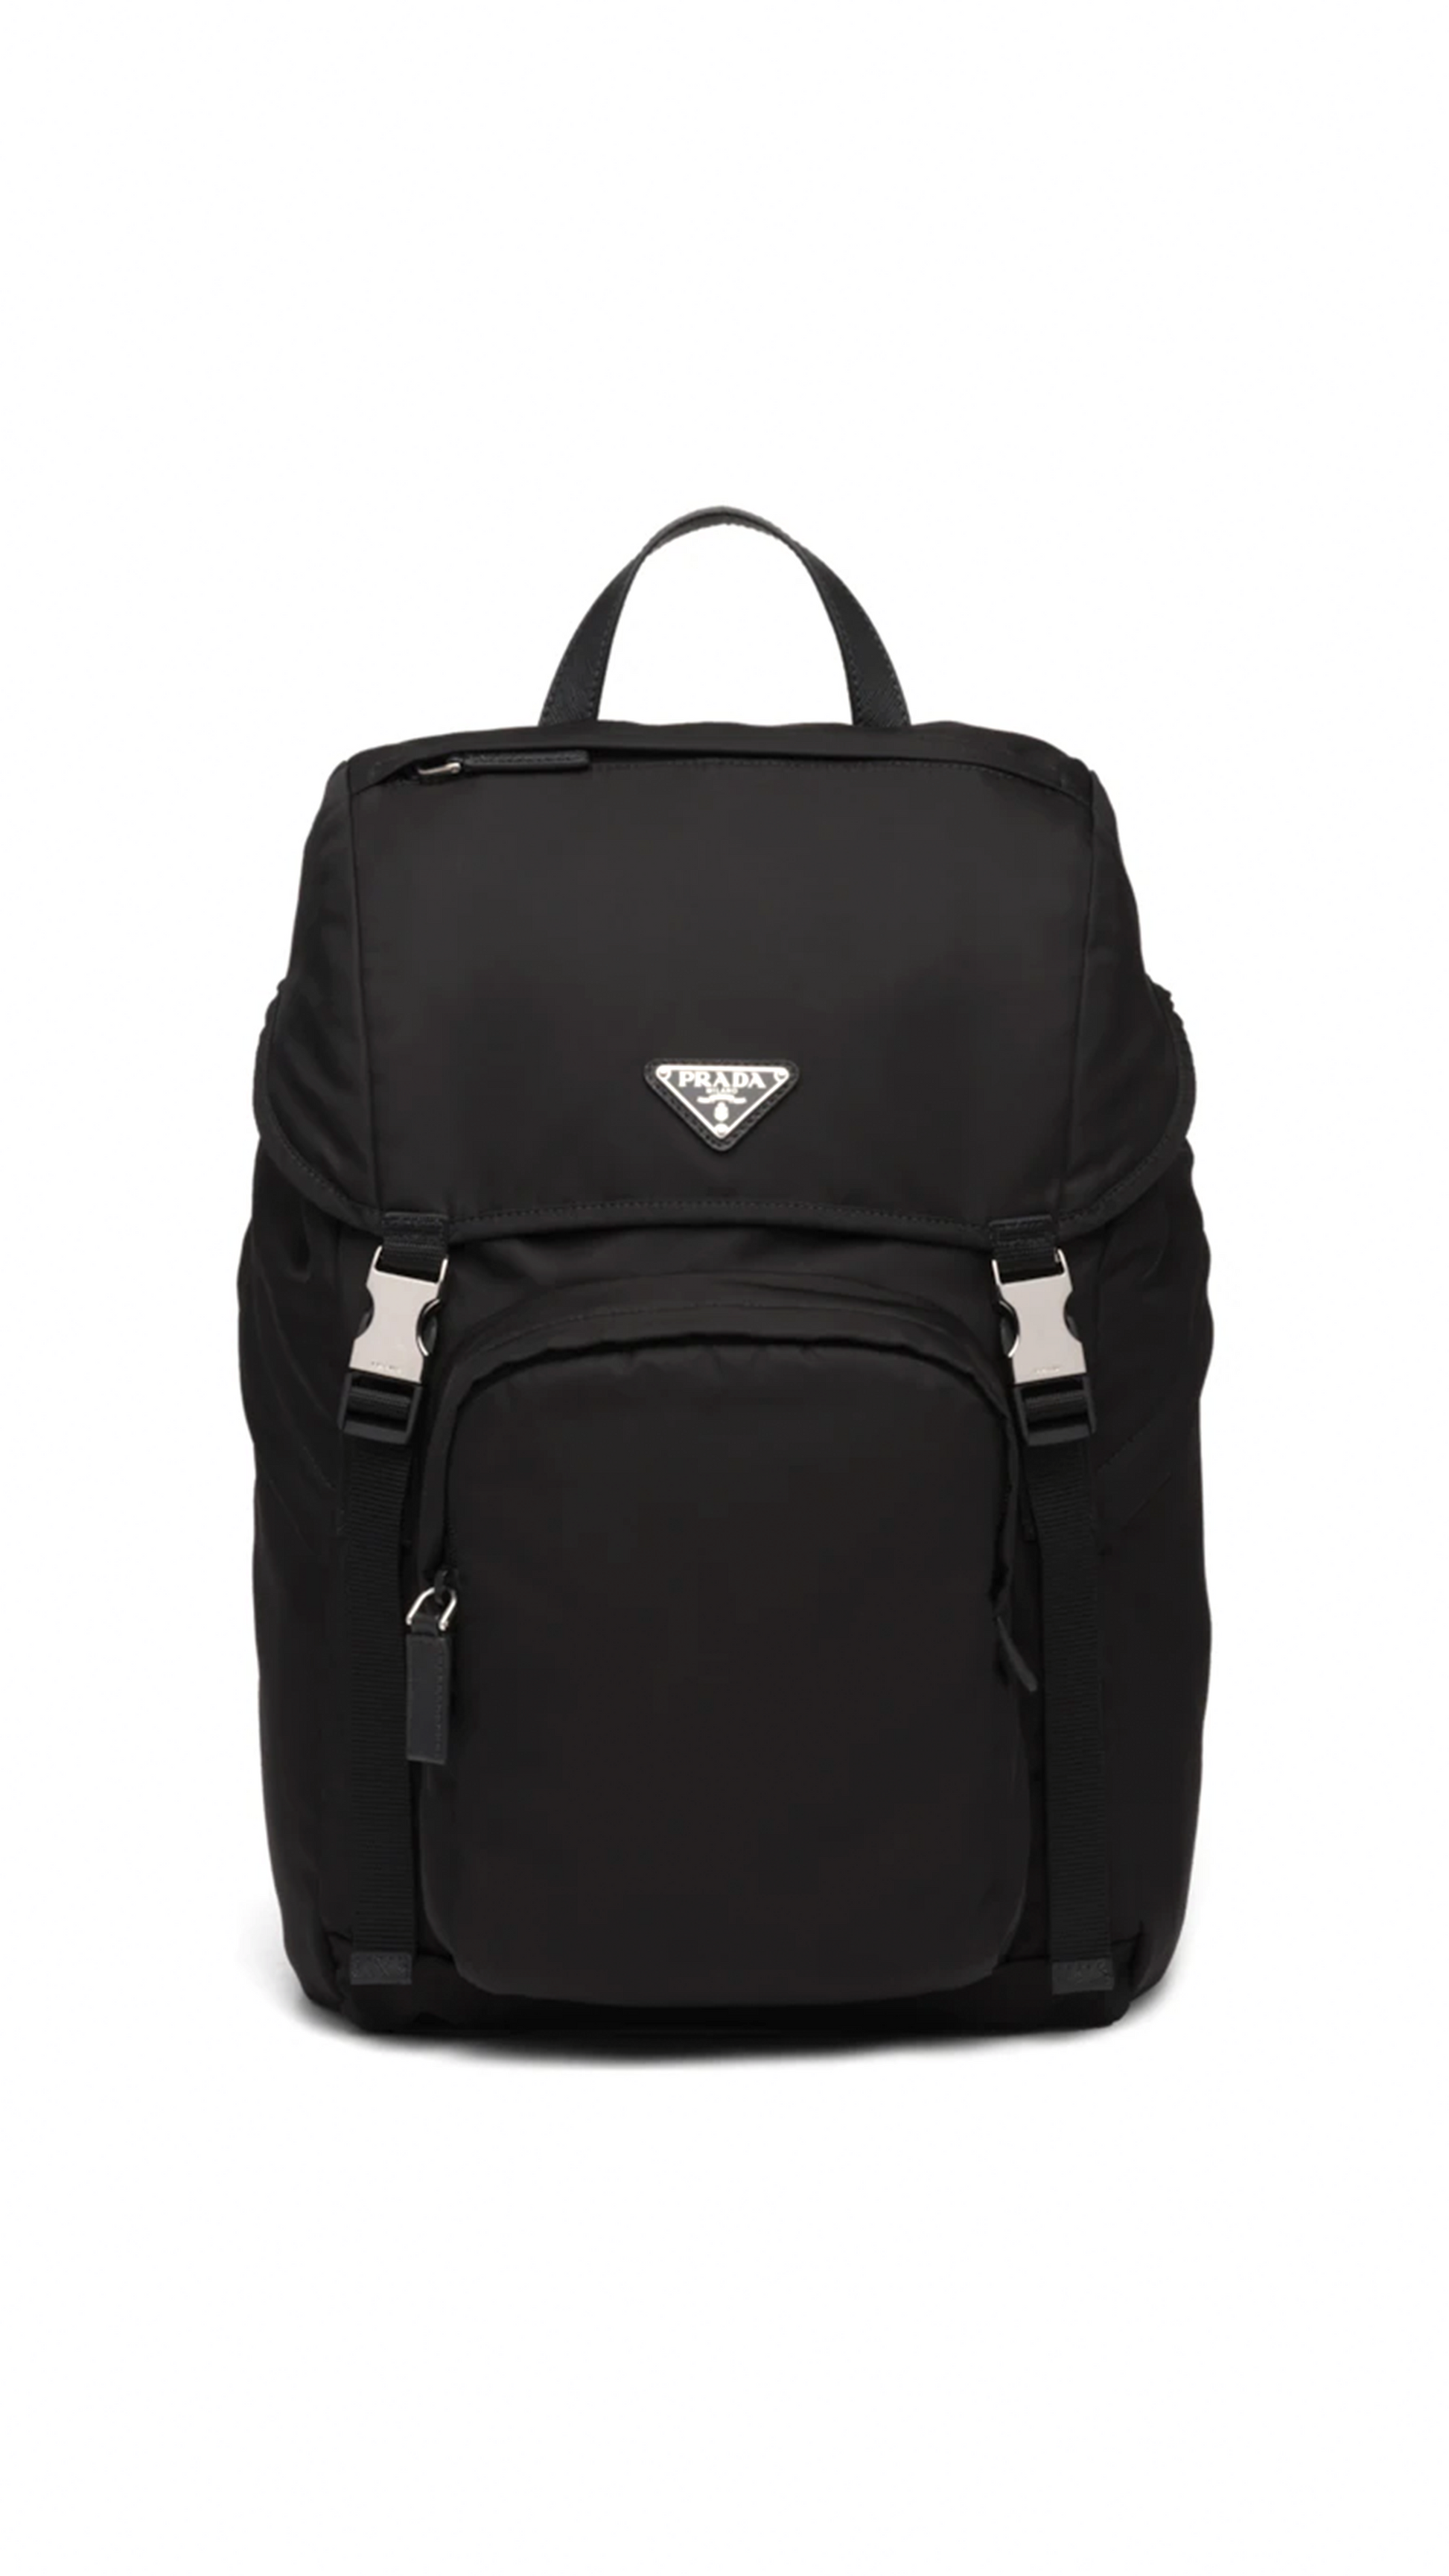 Black Re-nylon And Saffiano Leather Backpack